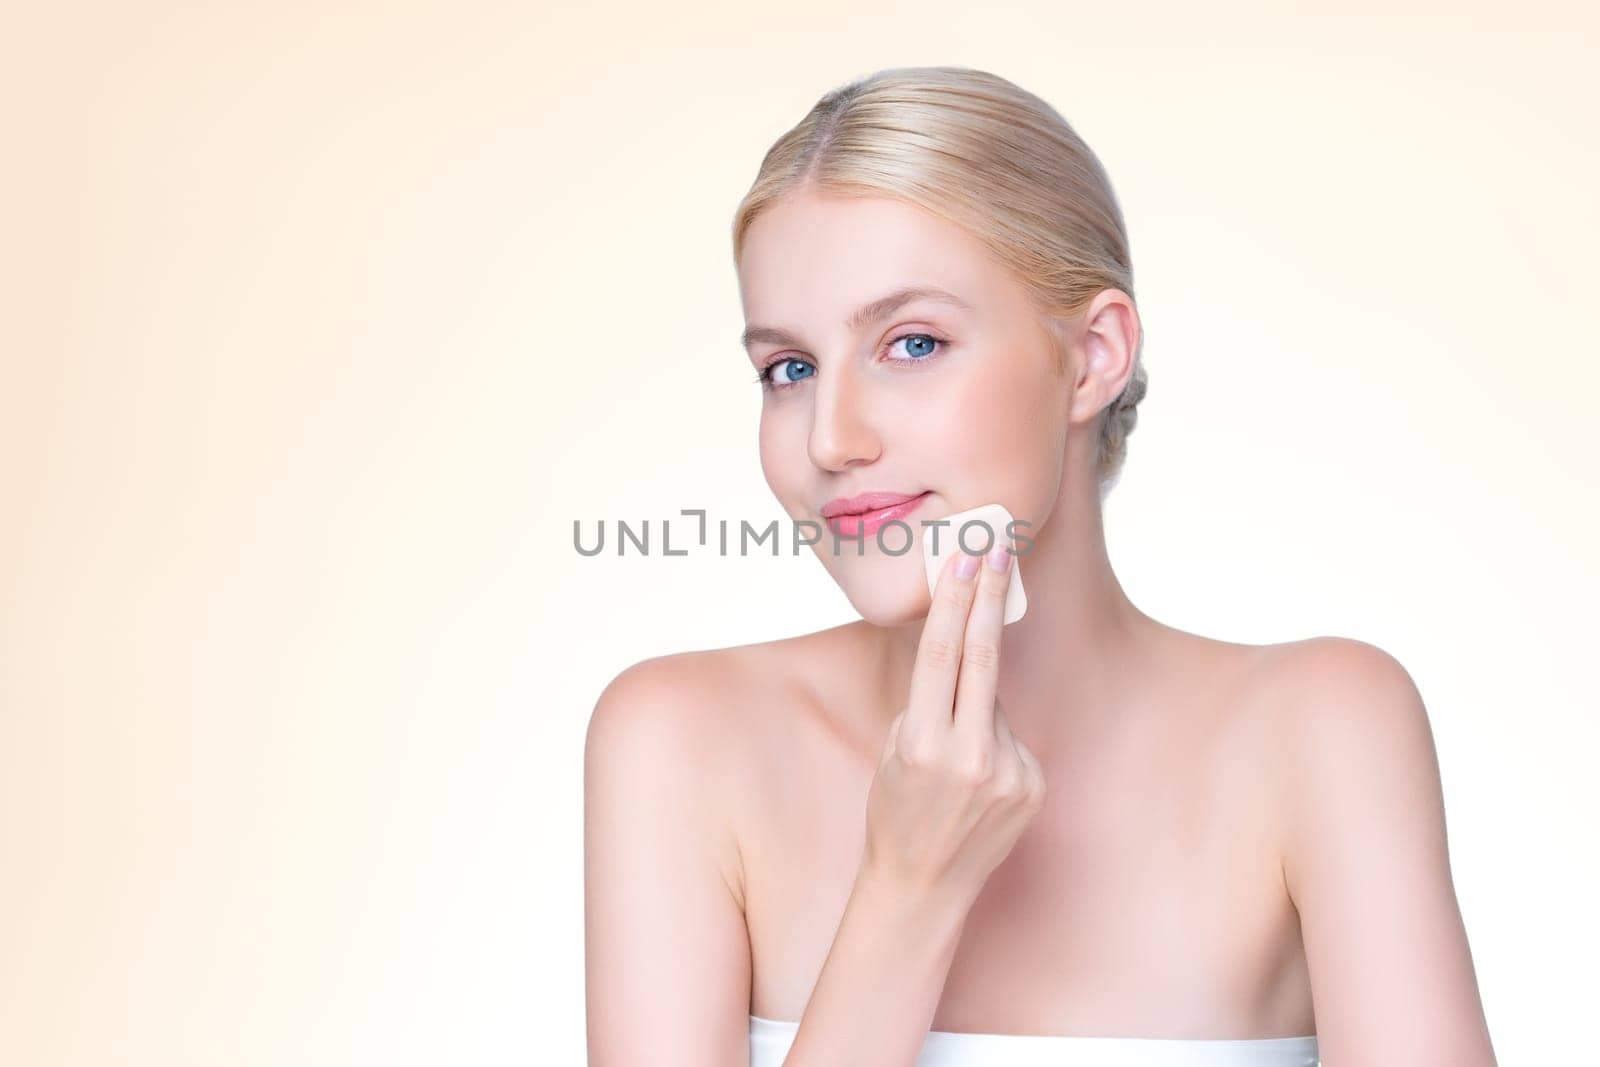 Personable beautiful natural soft makeup woman using powder puff for facial makeup concept. Cushion foundation applying on young girl face in isolated background.